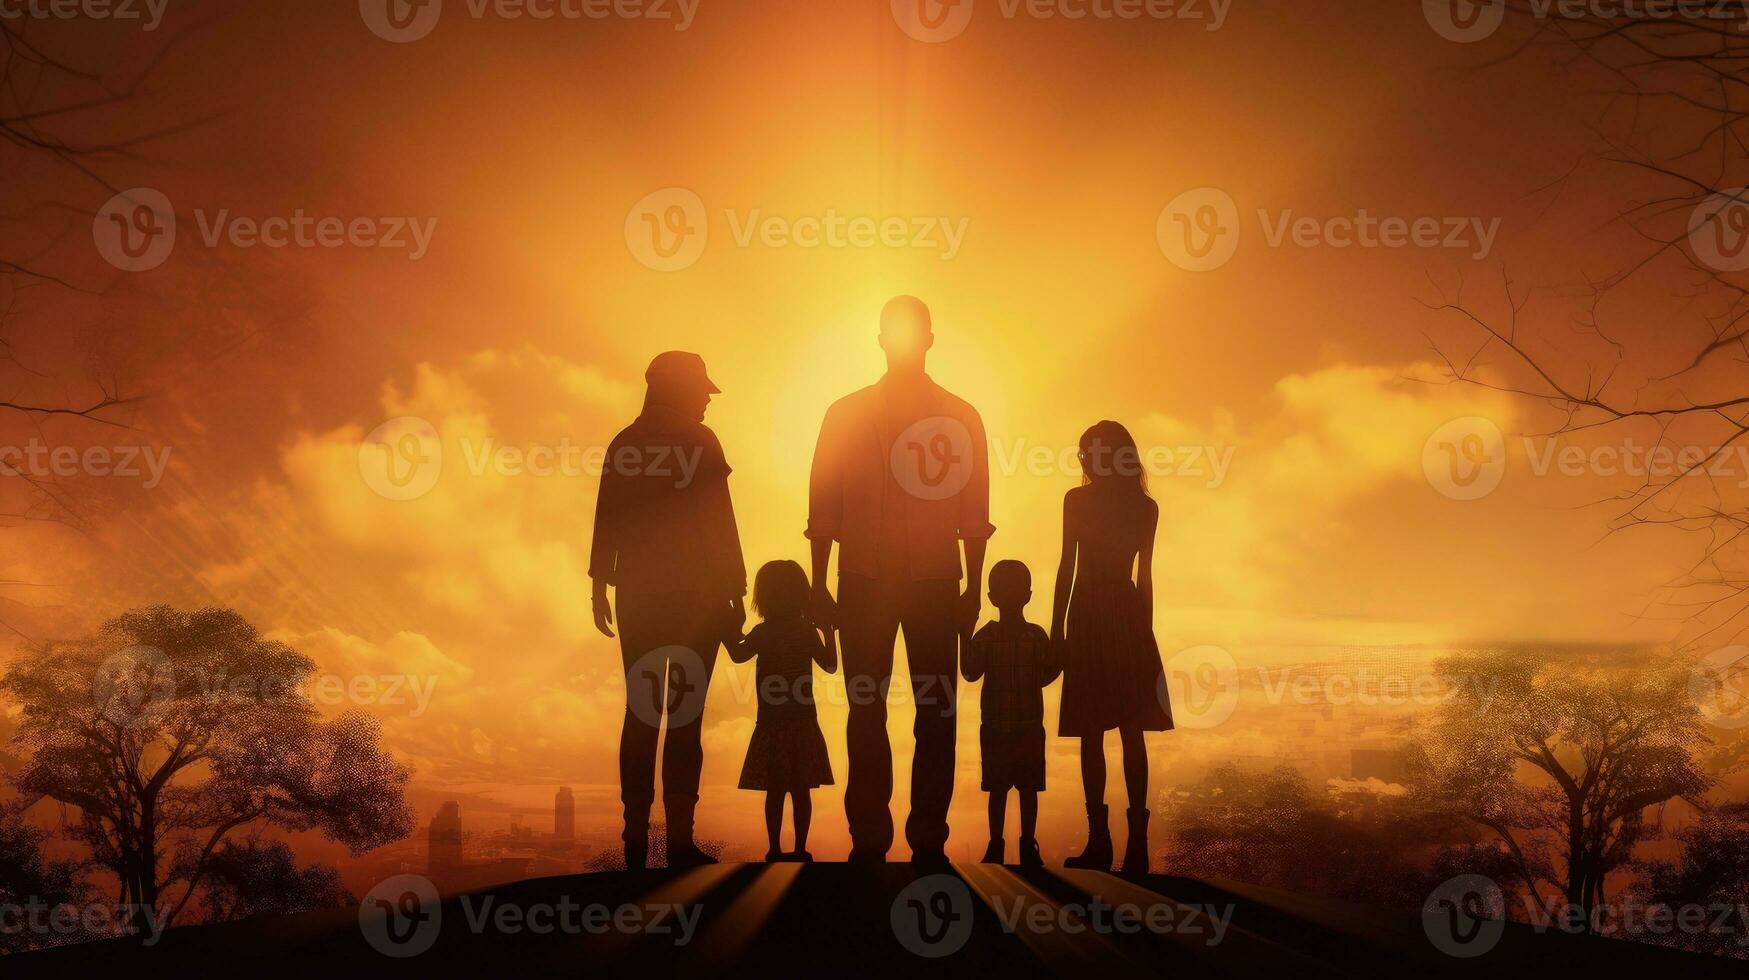 illustration featuring silhouettes of a family photo